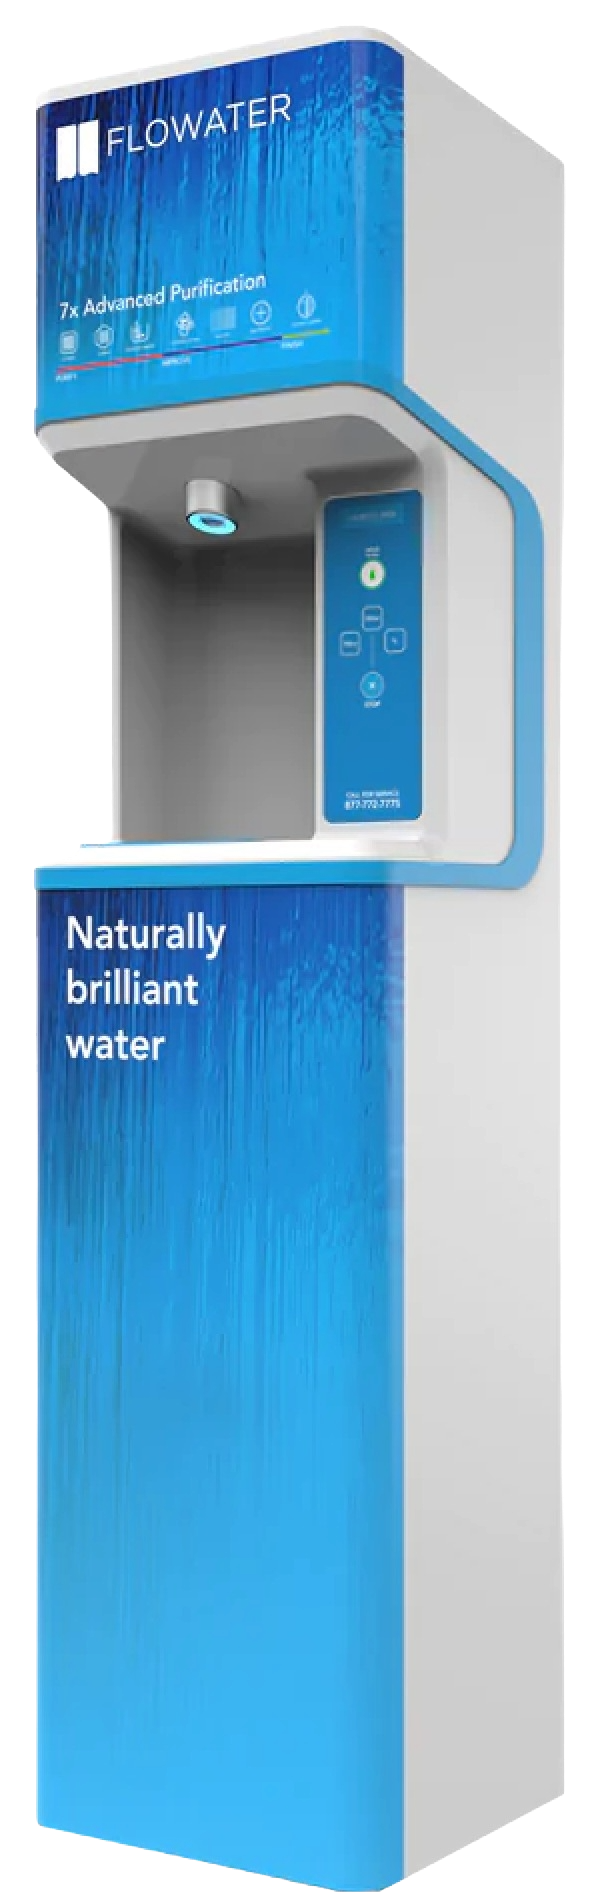 FloWater Water Filtration